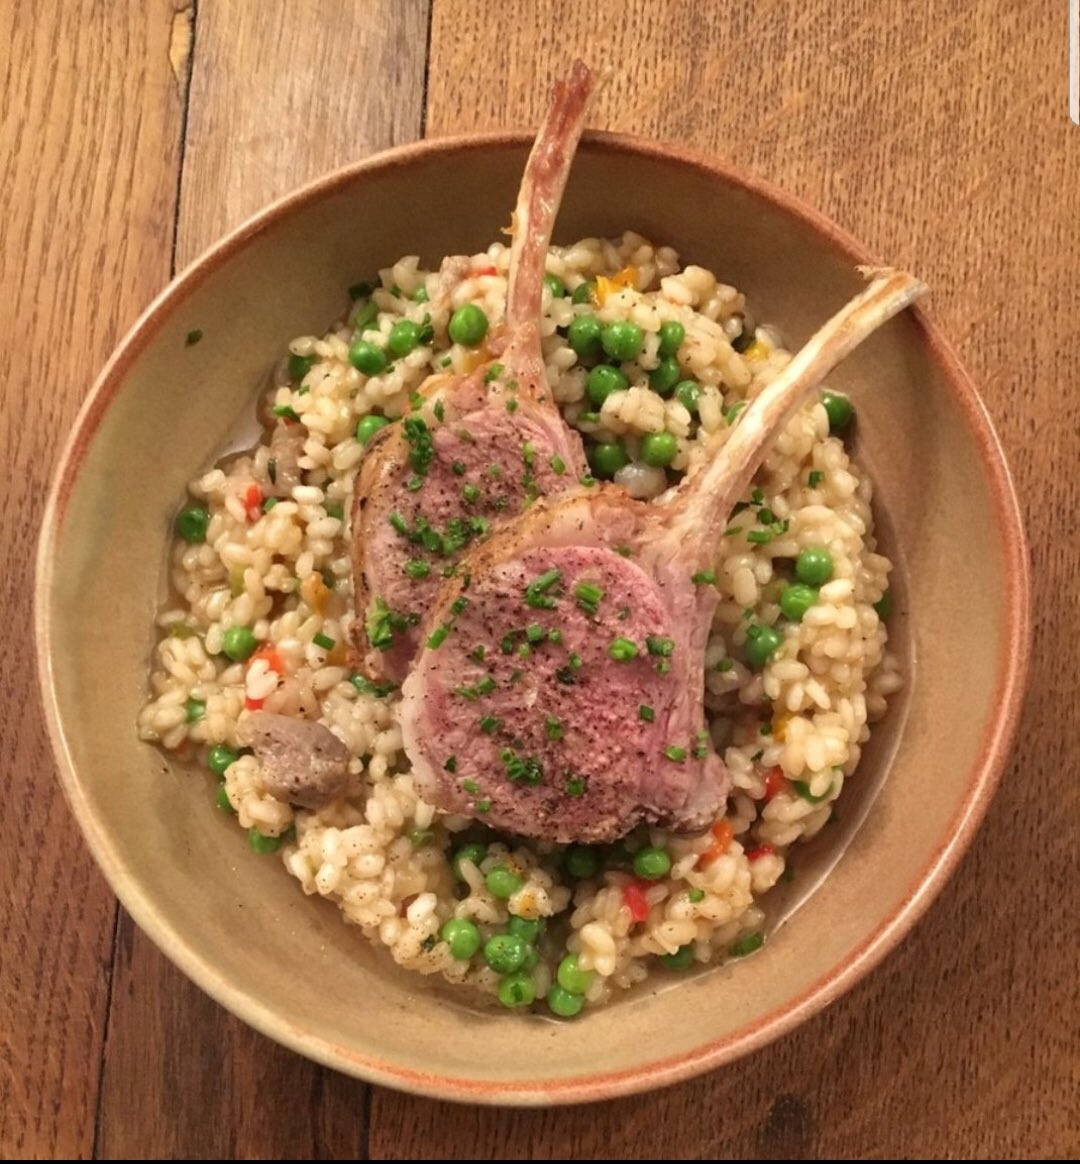 Another gorgeous Valentine’s special for next Thursday: arroz caldoso with succulent, melt-in-the-mouth lamb cutlets #Tooting #ValentinesDay #tapas #romanticfood